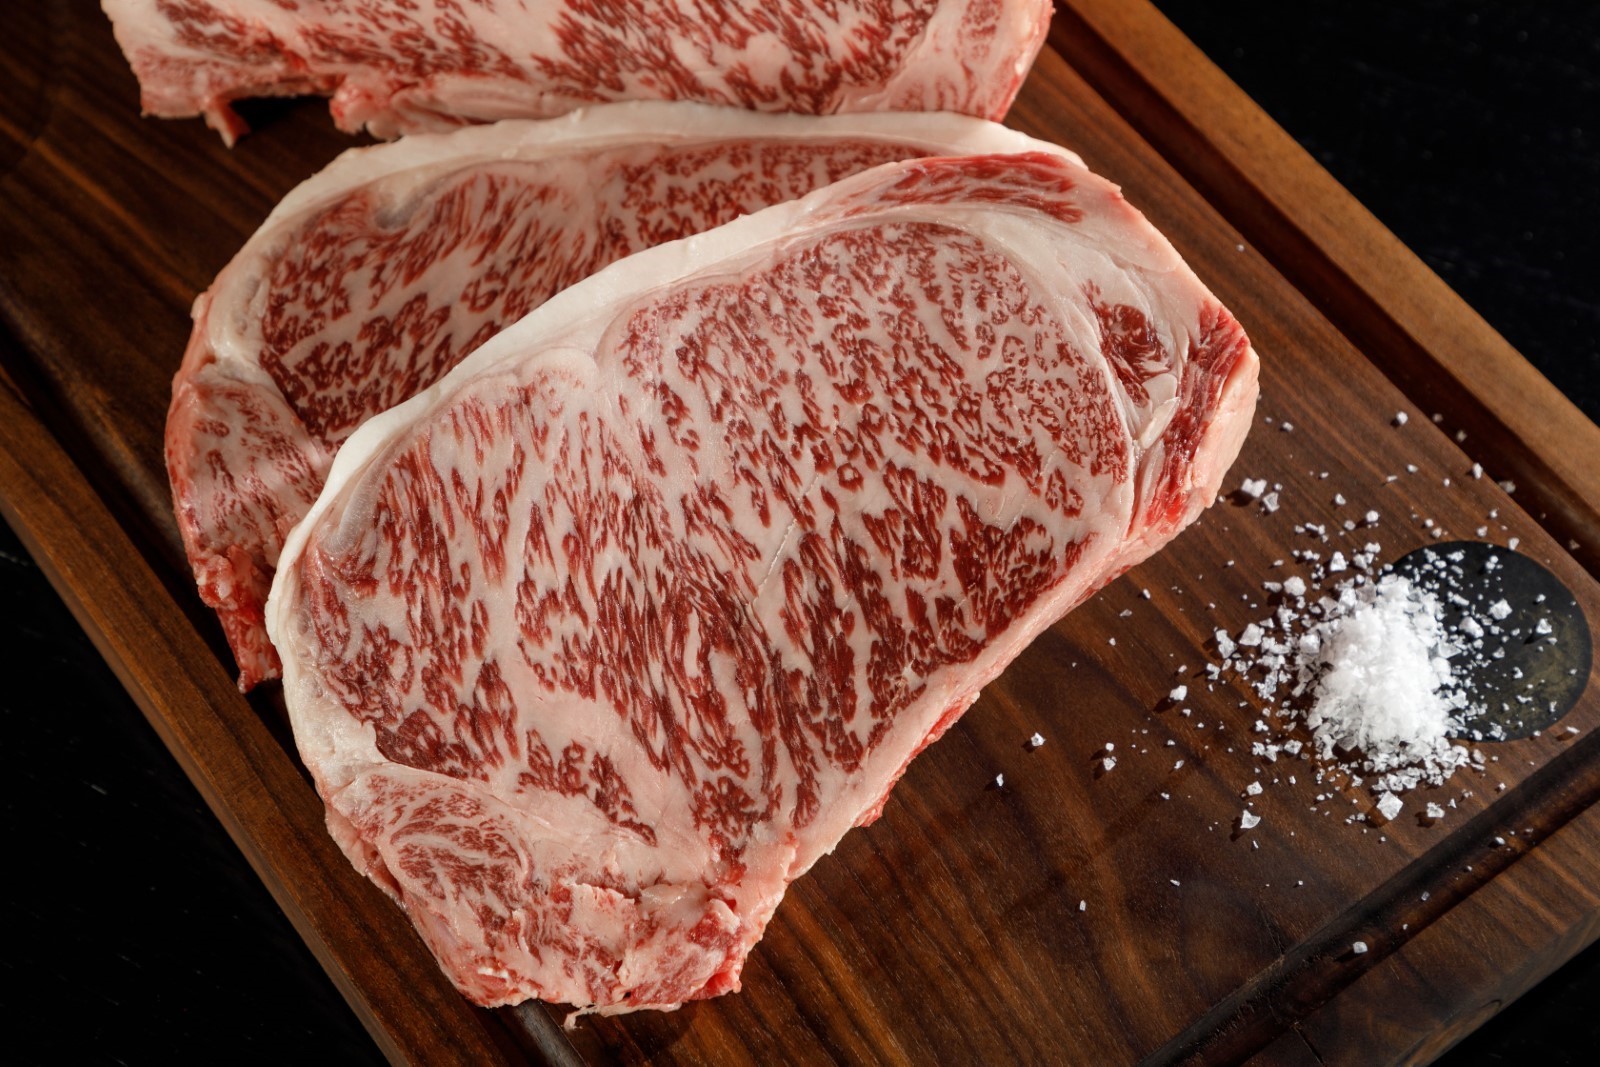 World's best steaks revealed: Who made the cut?